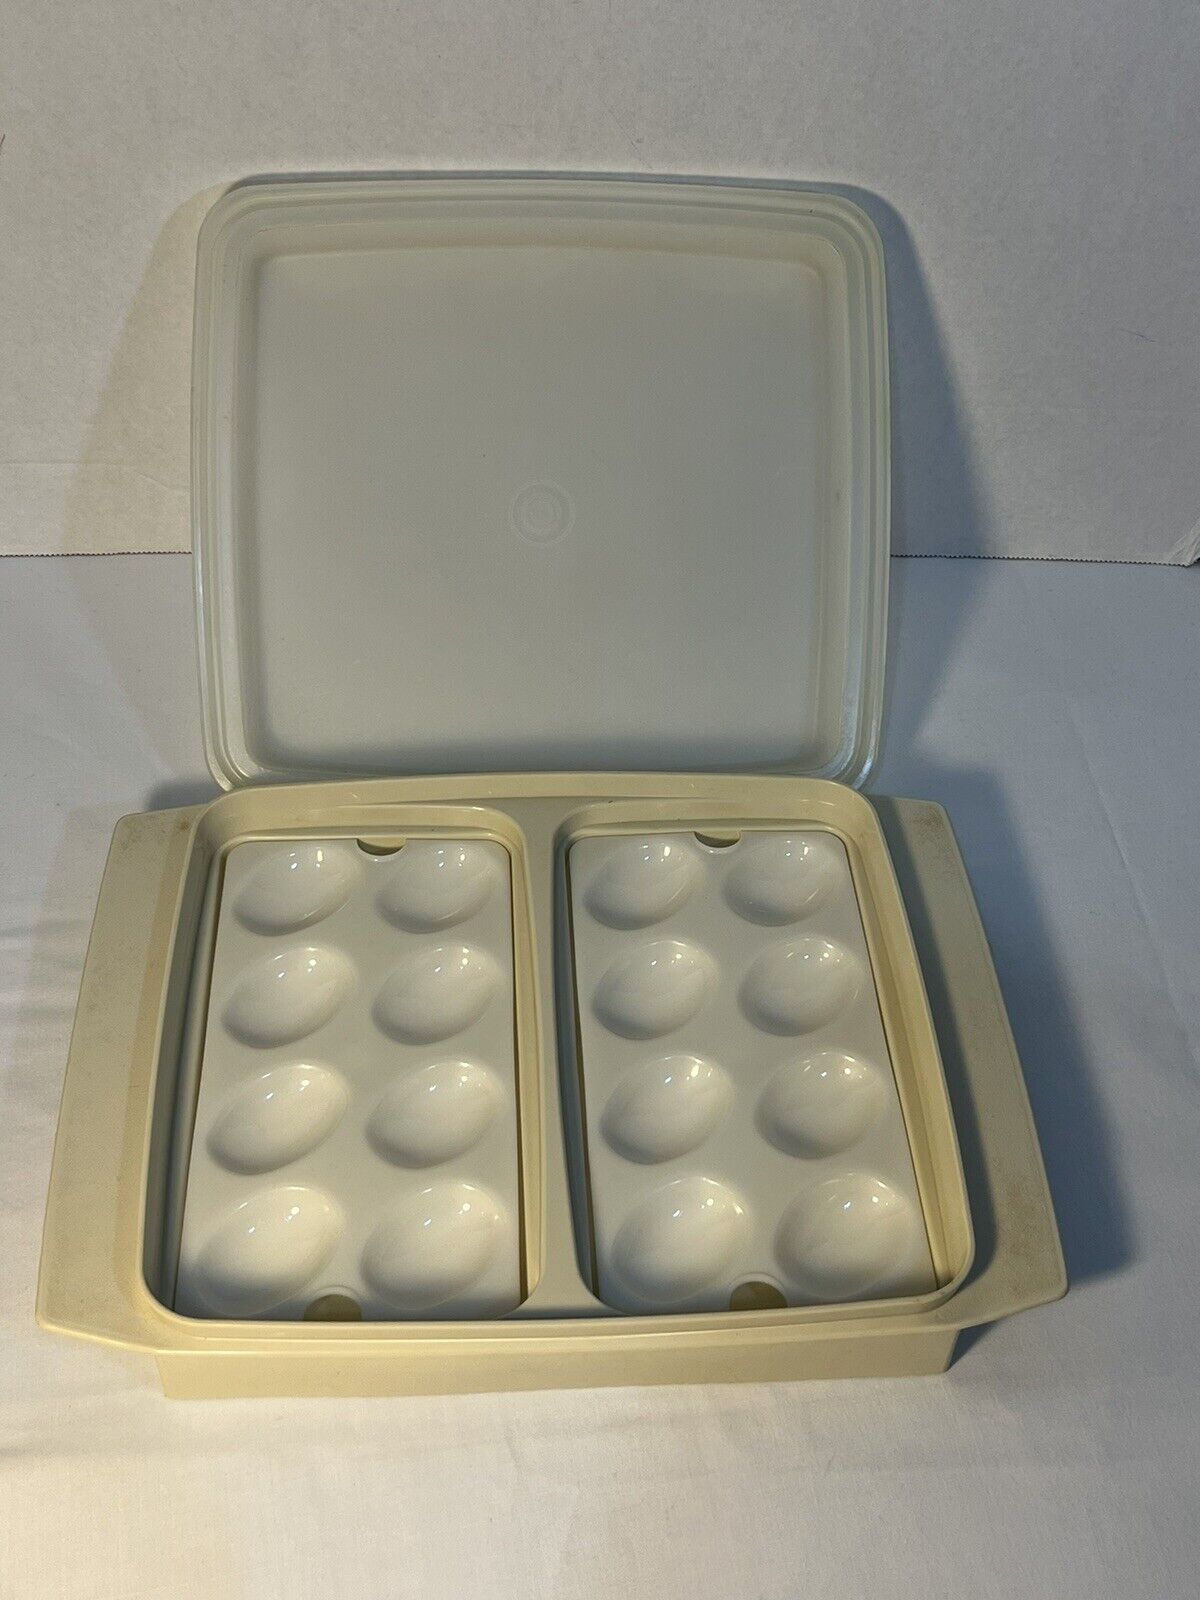 Vintage Tupperware 4 Piece Deviled Egg Carrier Keeper Tray Almond Color 723-4